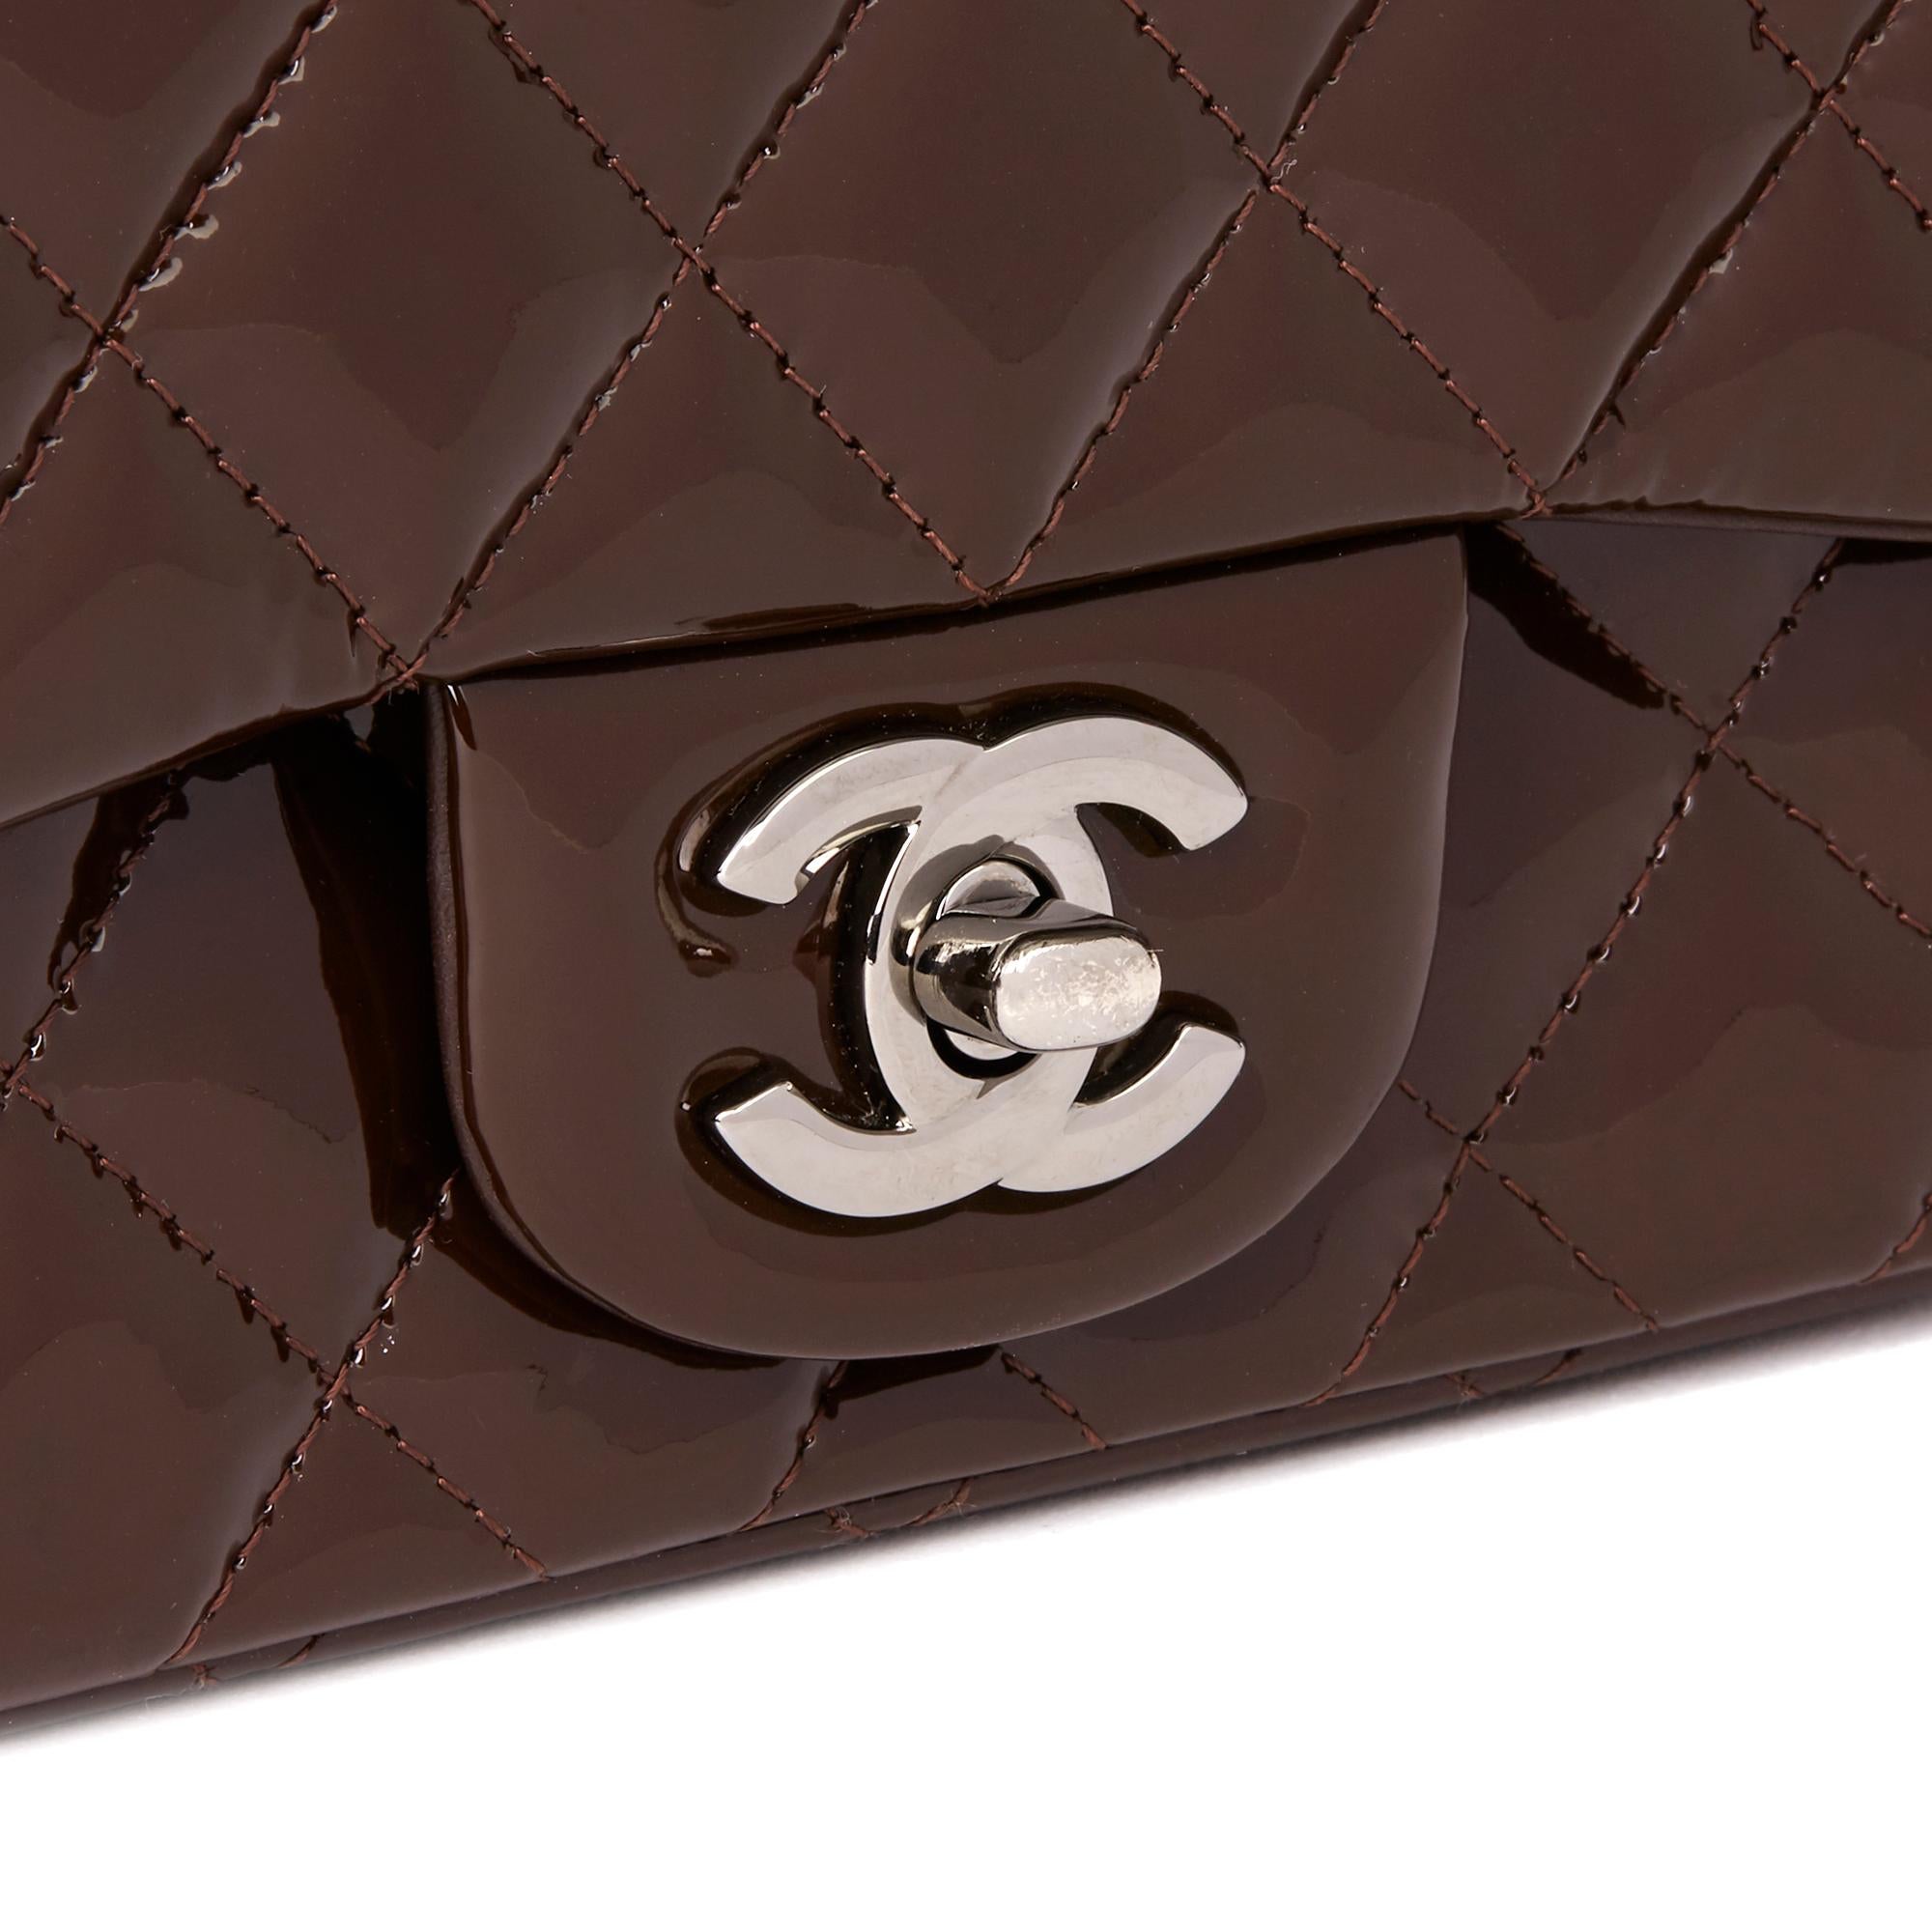 2014 Chanel Chocolate Brown Quilted Patent Leather Mini Flap Bag 2